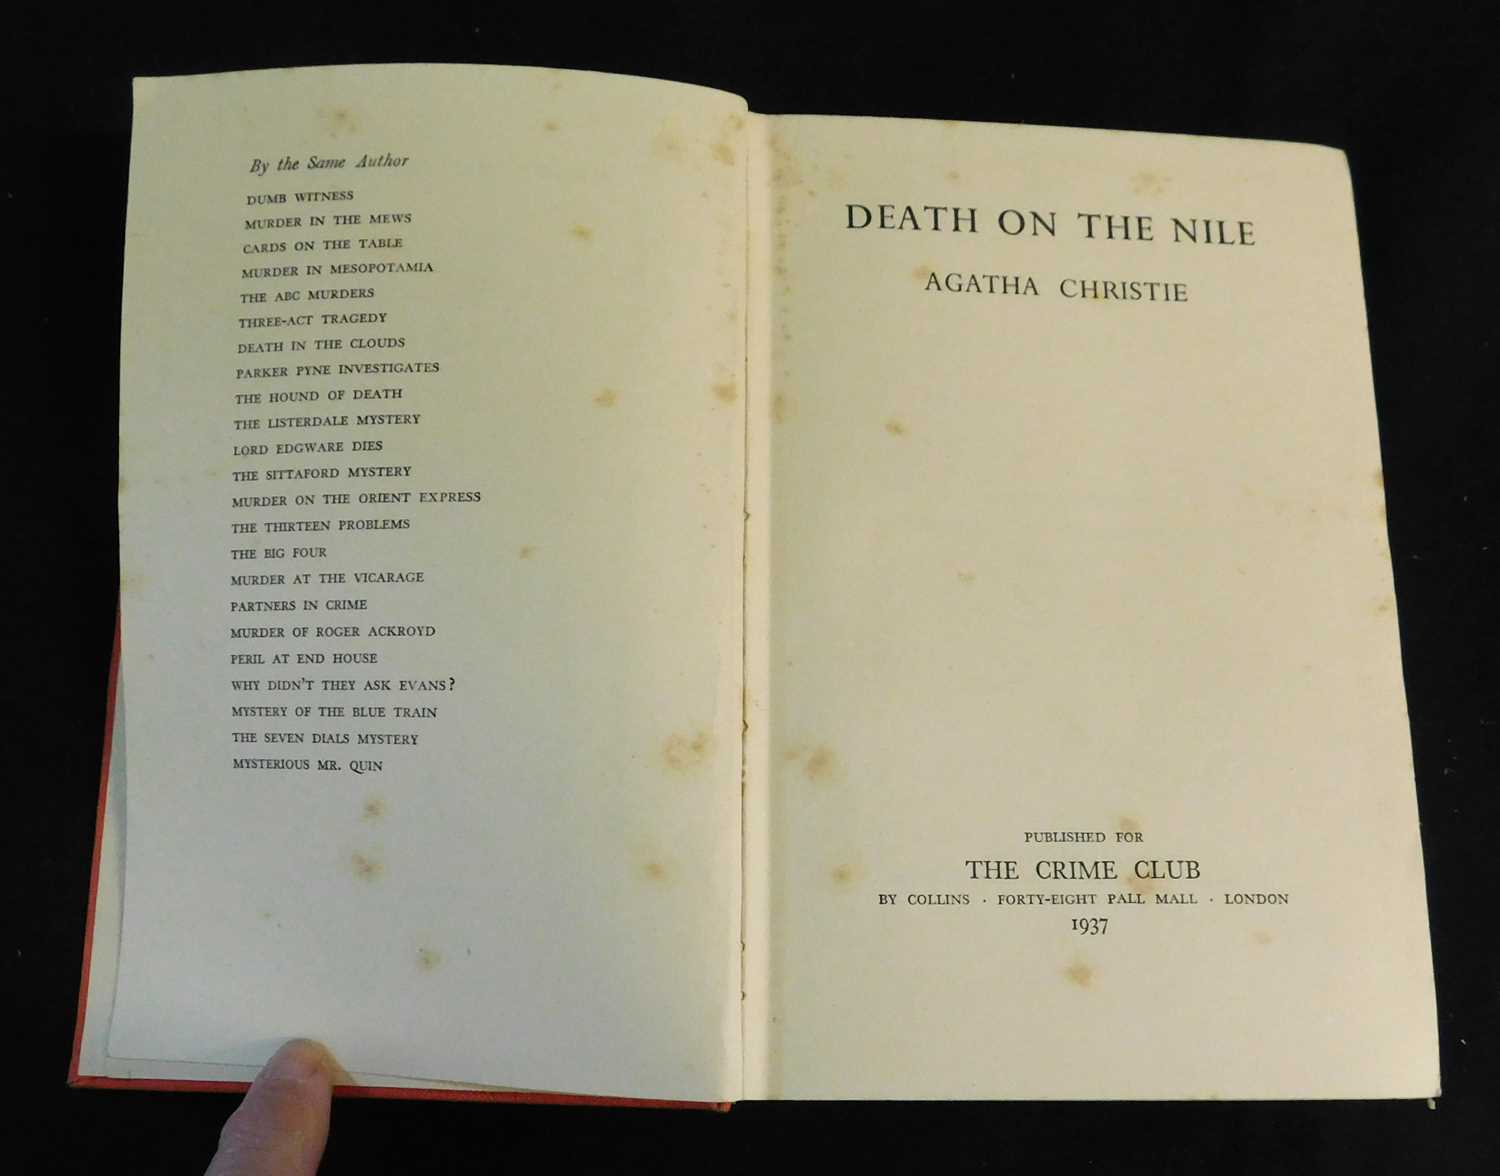 AGATHA CHRISTIE: DEATH ON THE NILE, London, Collins for The Crime Club, 1937, 1st edition, 4pp